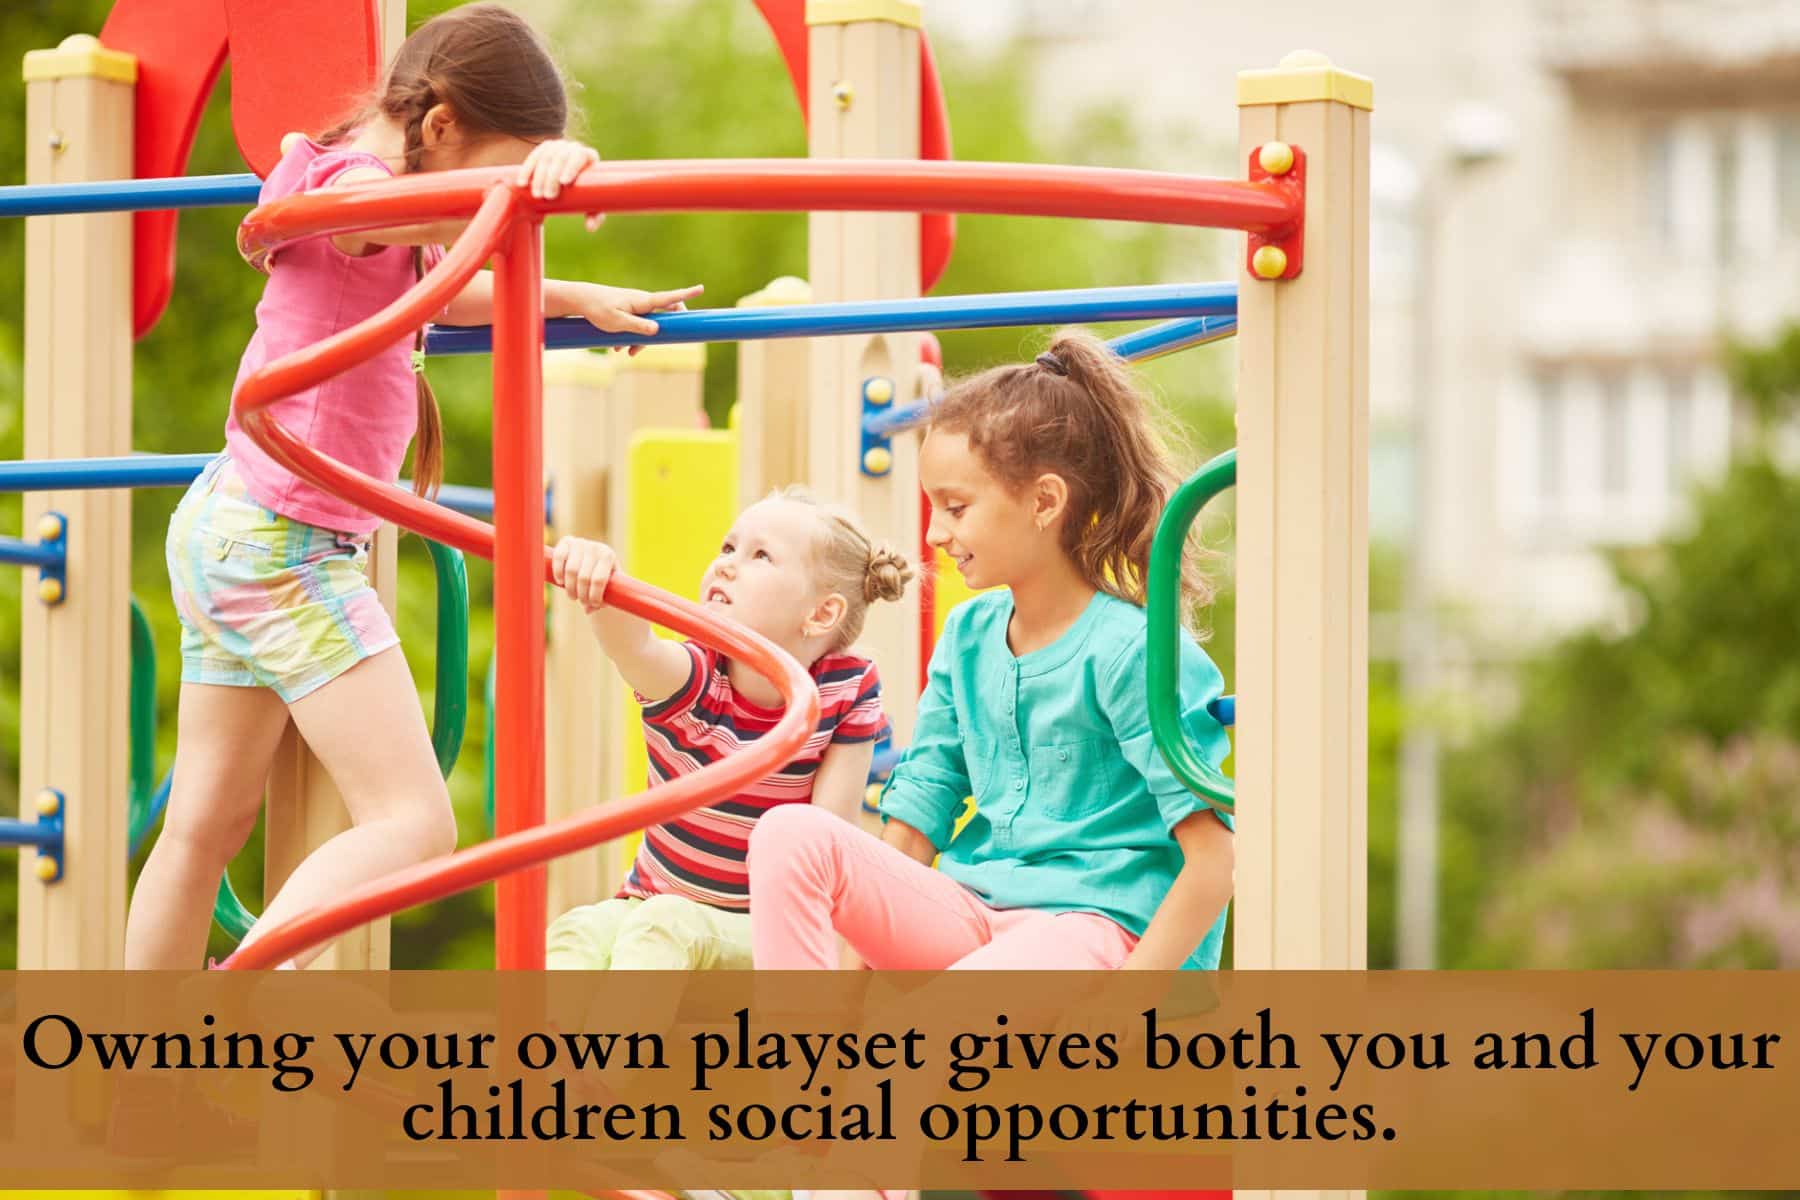 playsets provide social opportunities